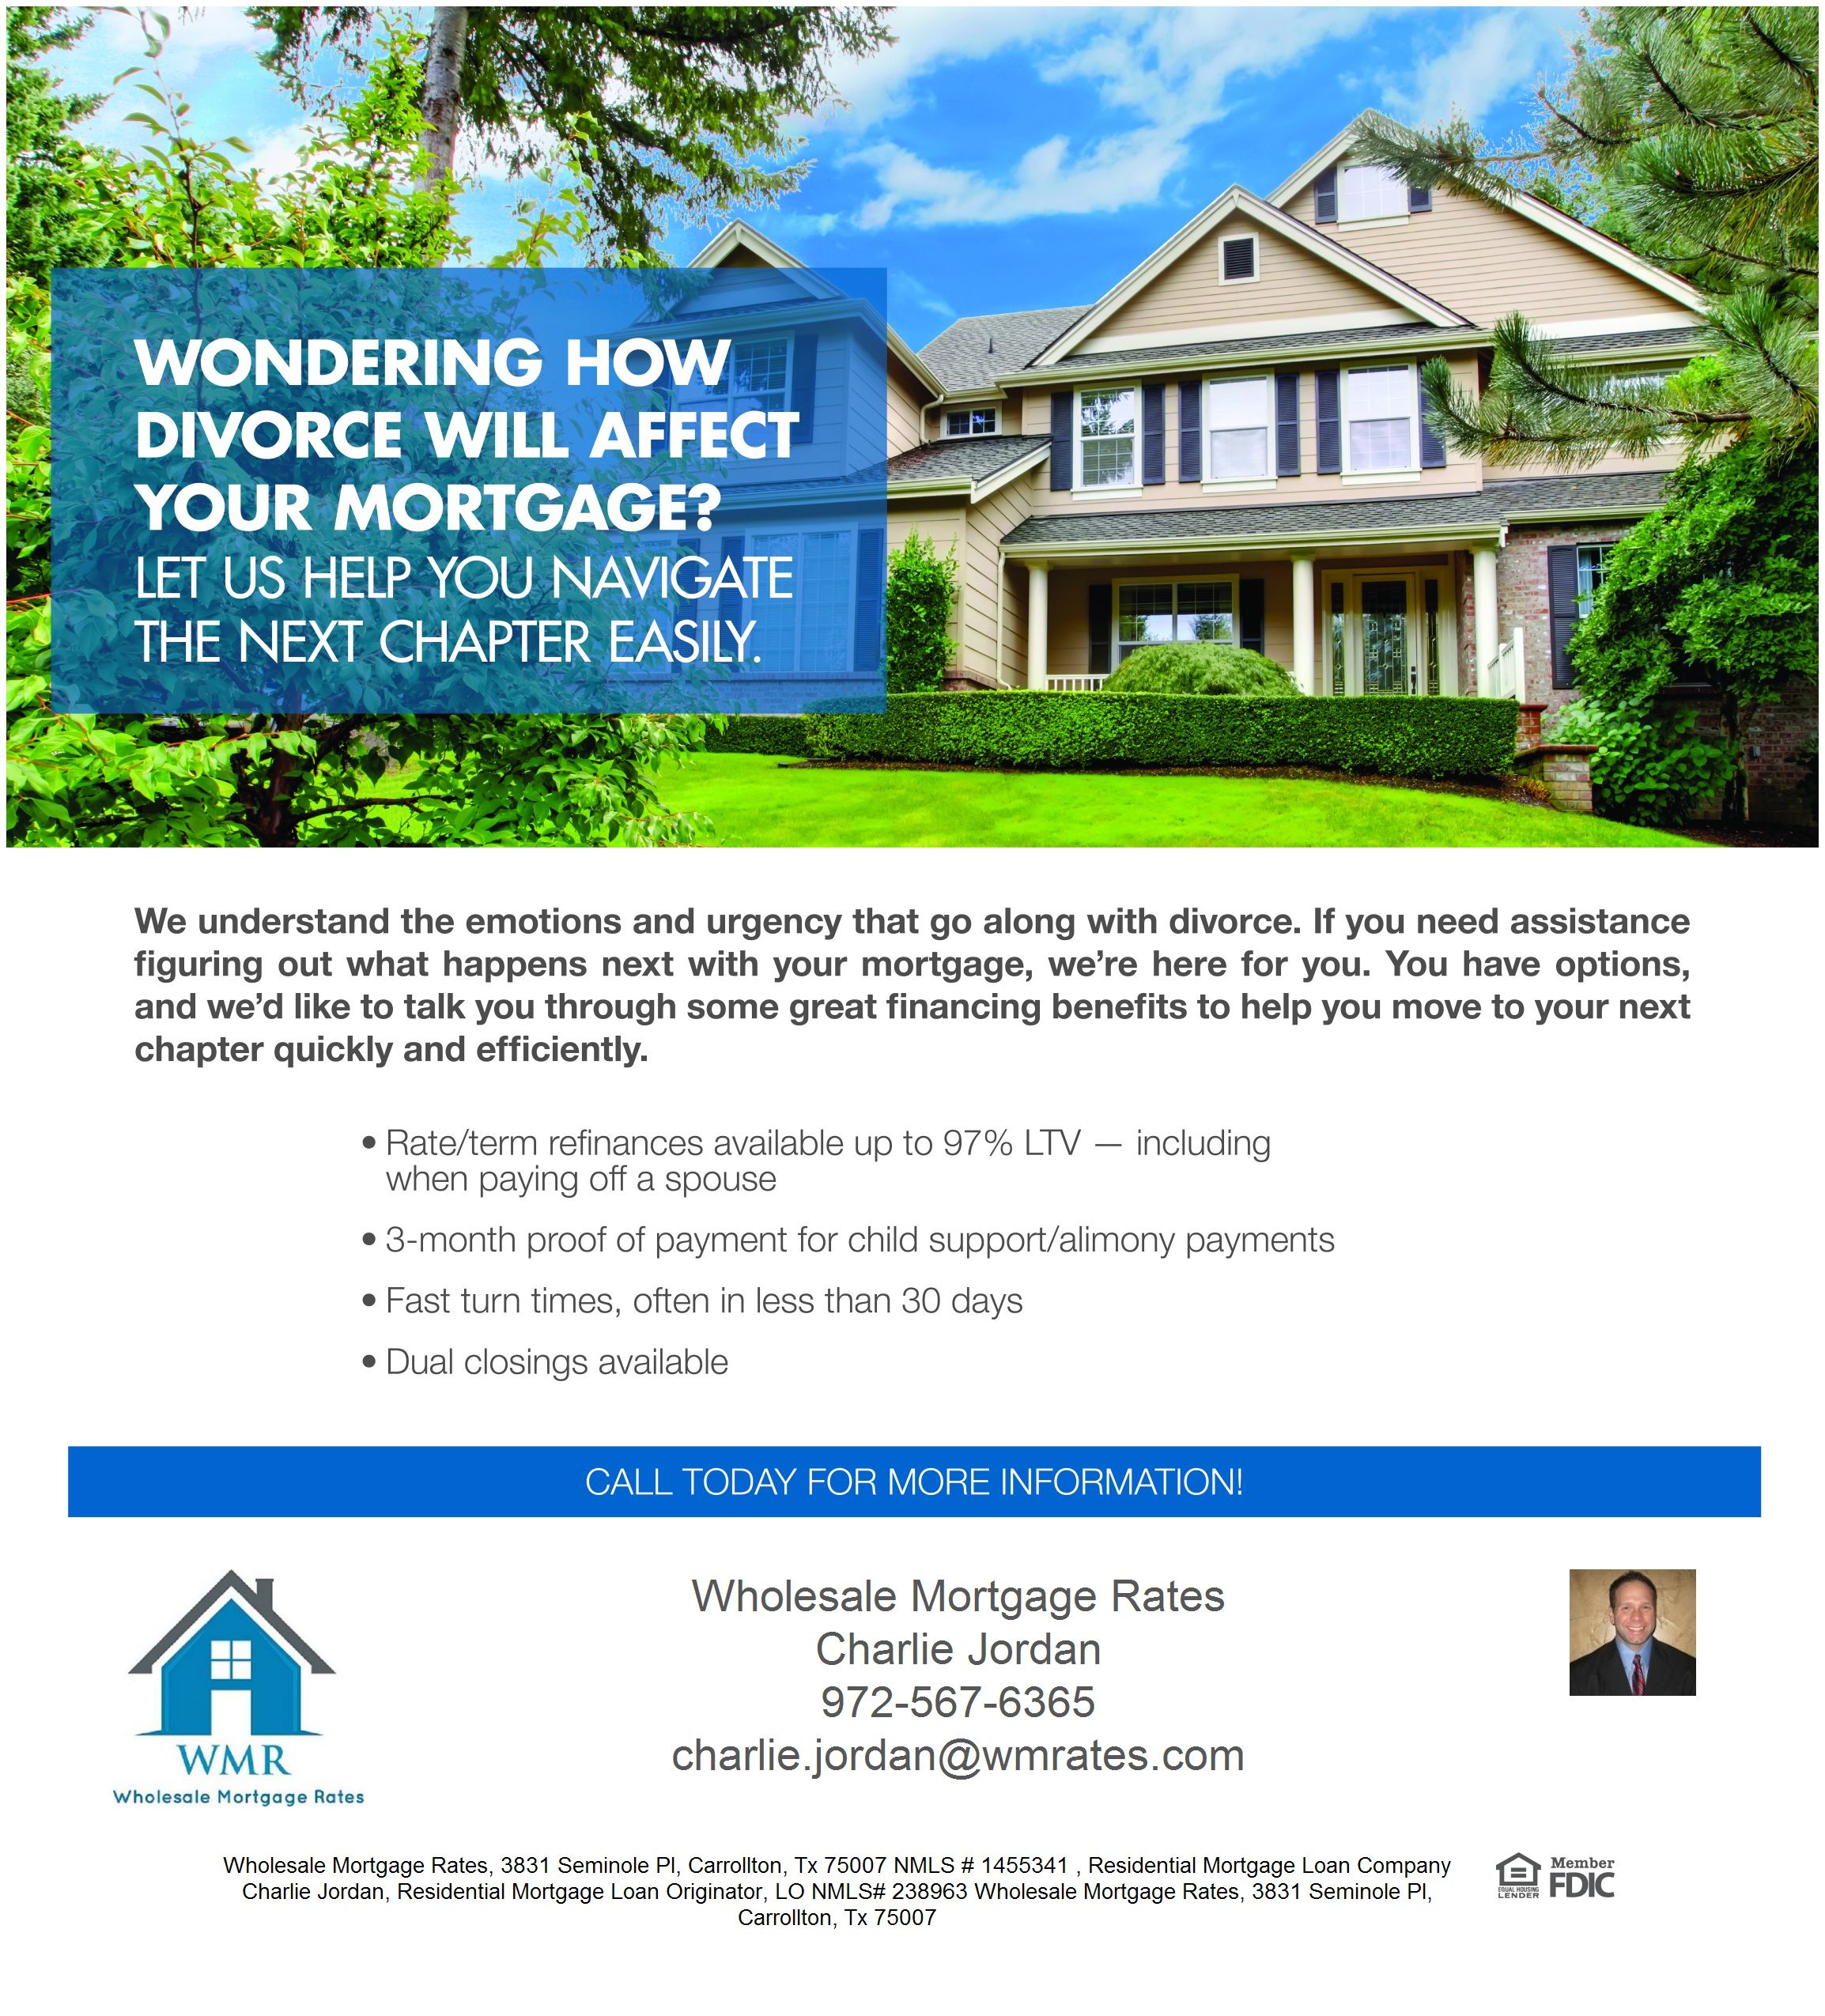 Get a Rate and Term refinance when splitting up equity after a divorce ...